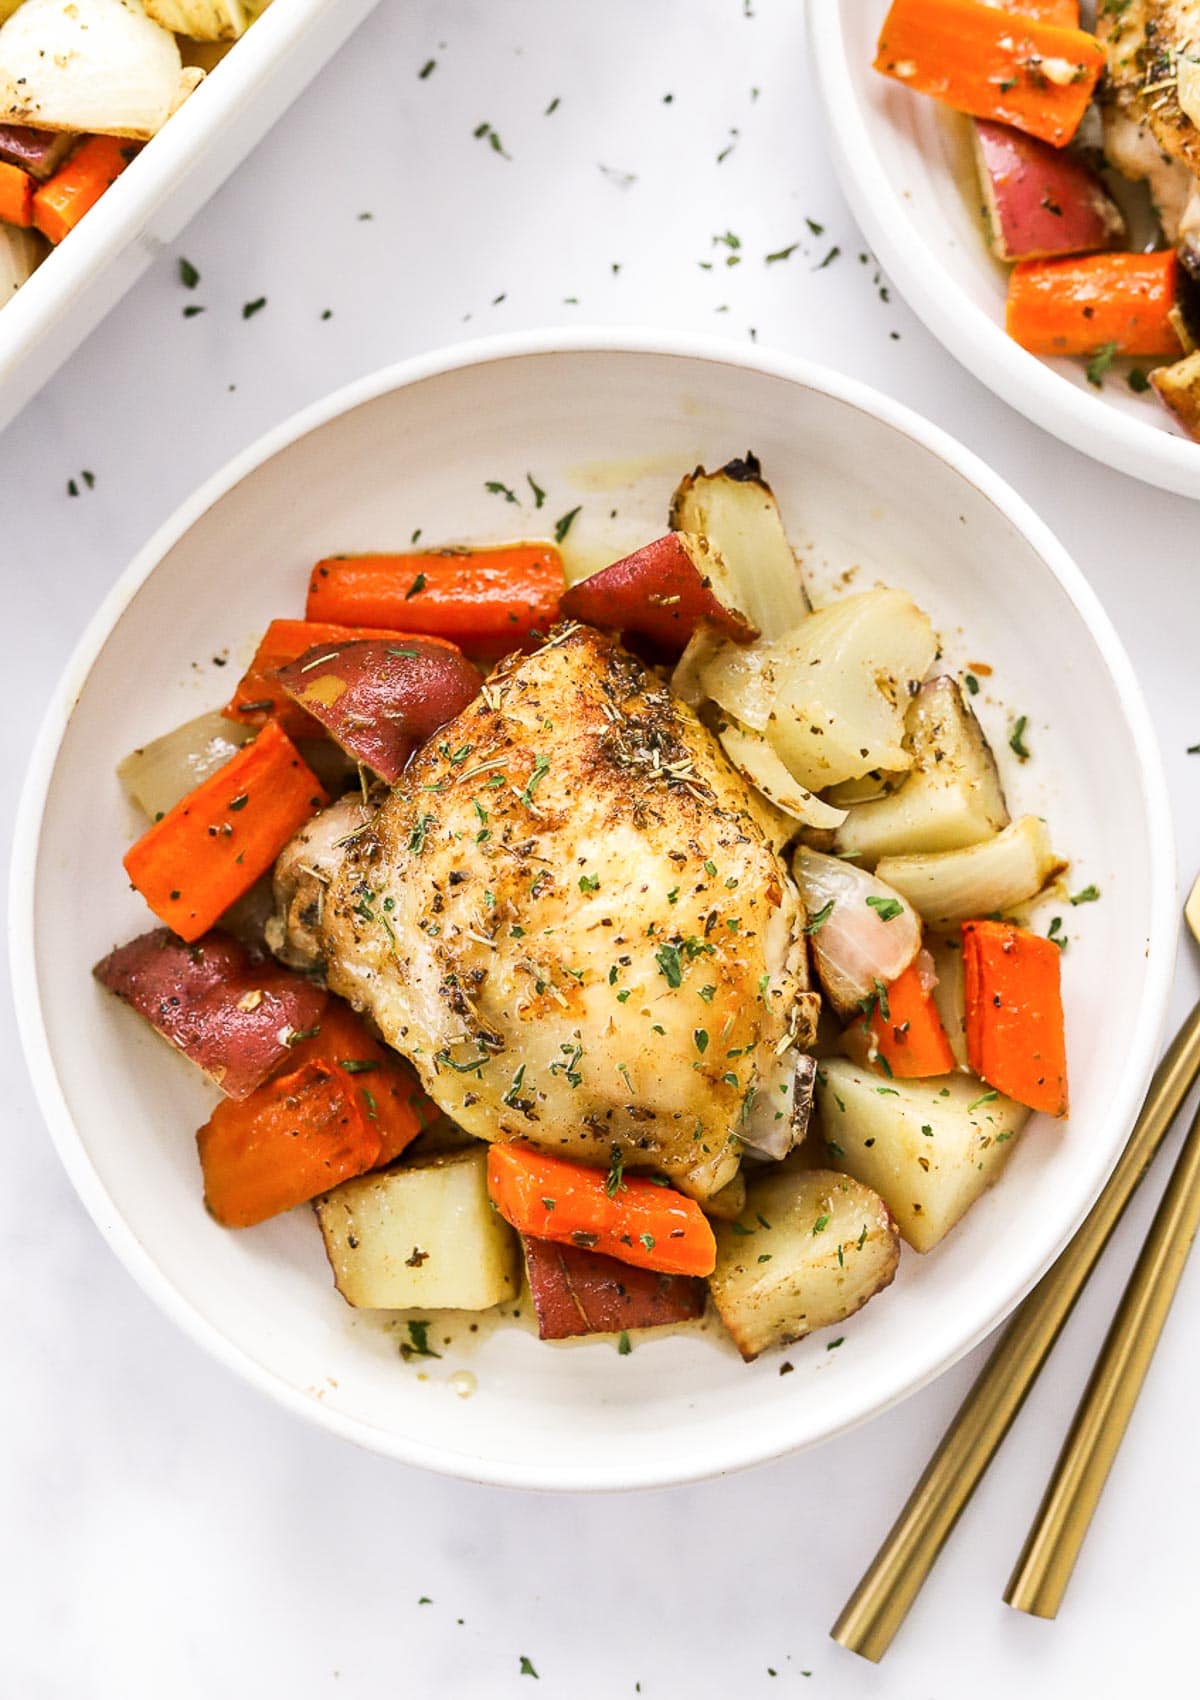 Roasted chicken thighs and potatoes with carrots served in a bowl and garnished with herbs.